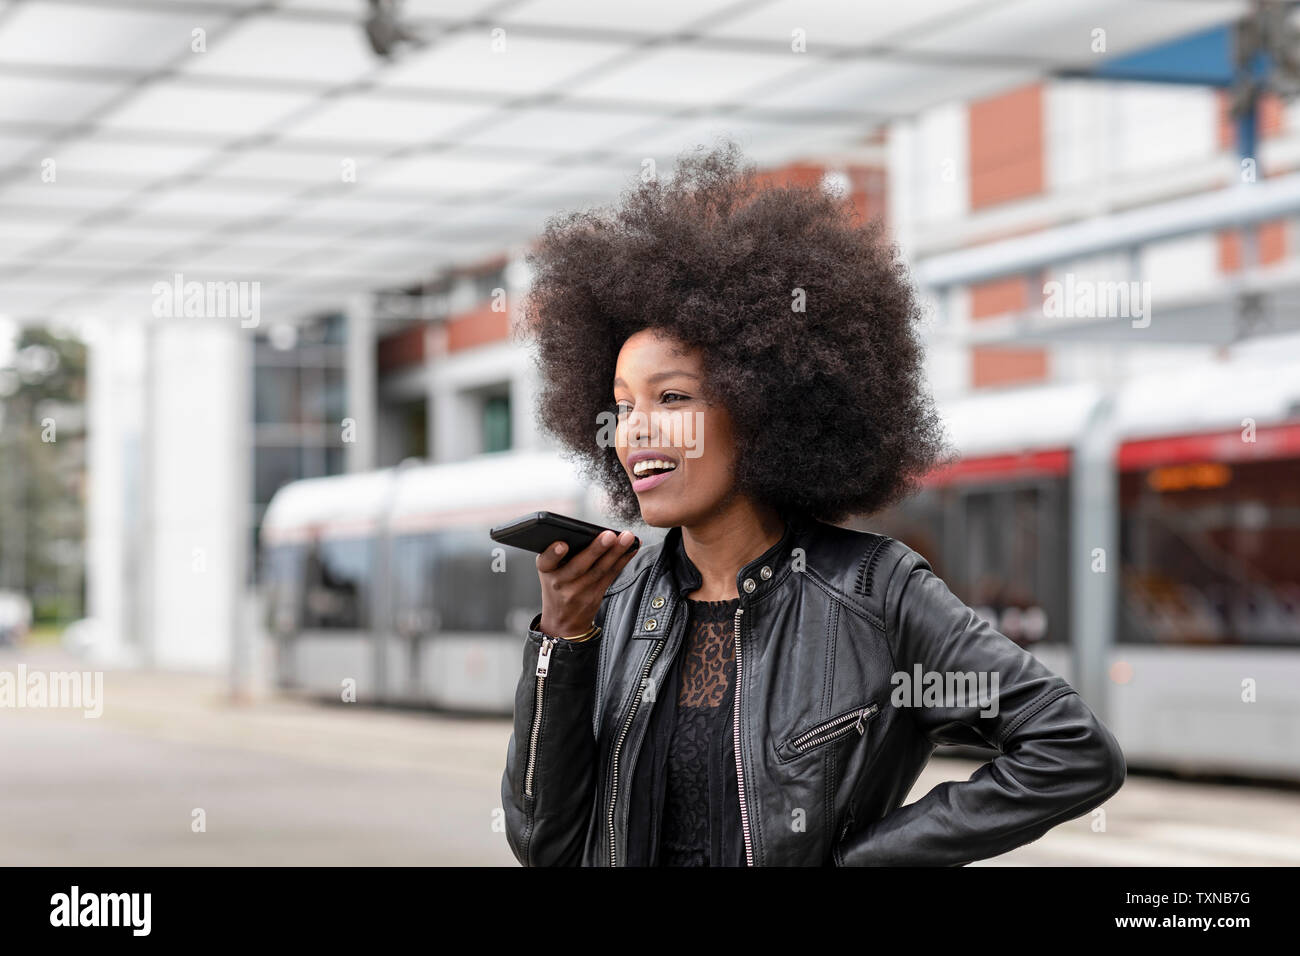 Young woman with afro hair at city train station, talking to smartphone Stock Photo